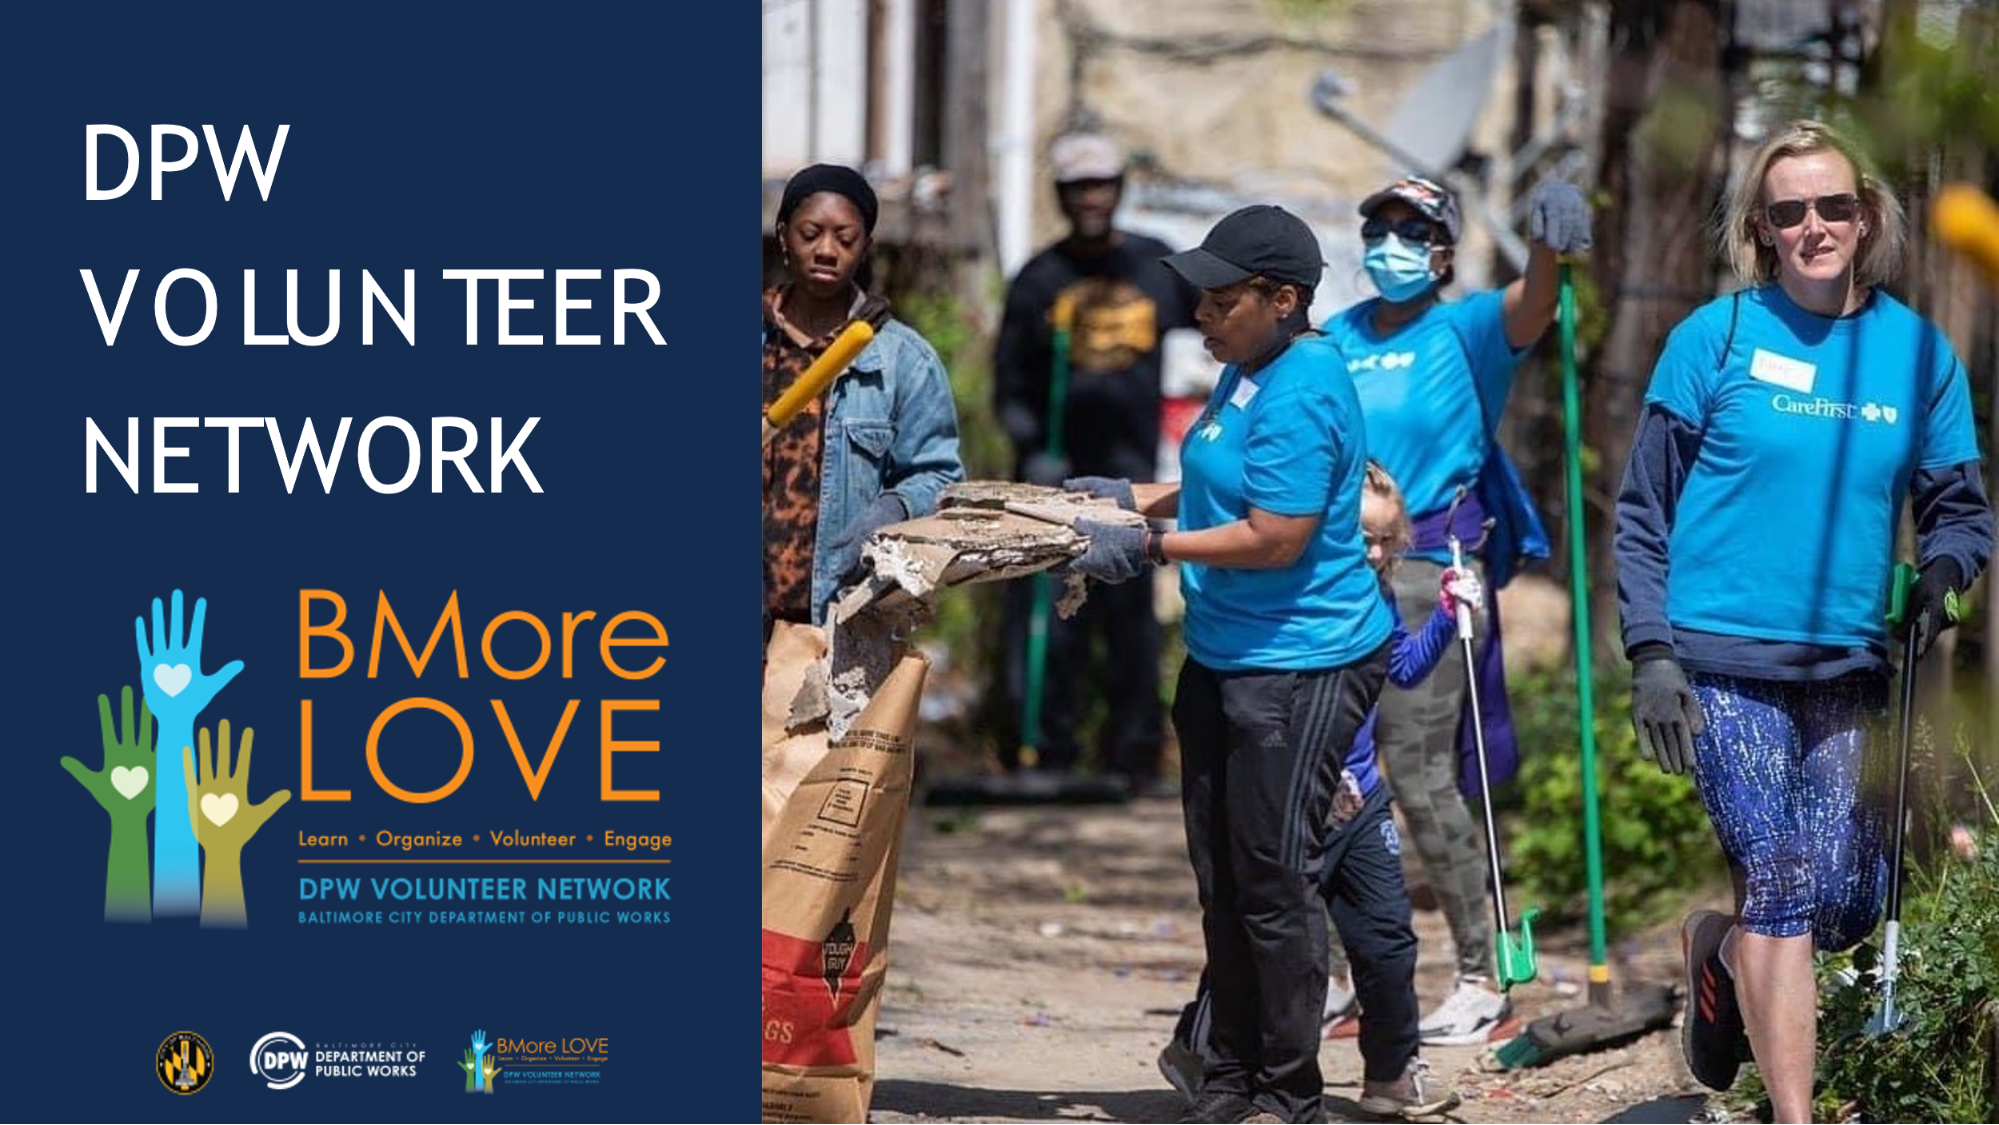 DPW Volunteer Network and BMore Love campaign.